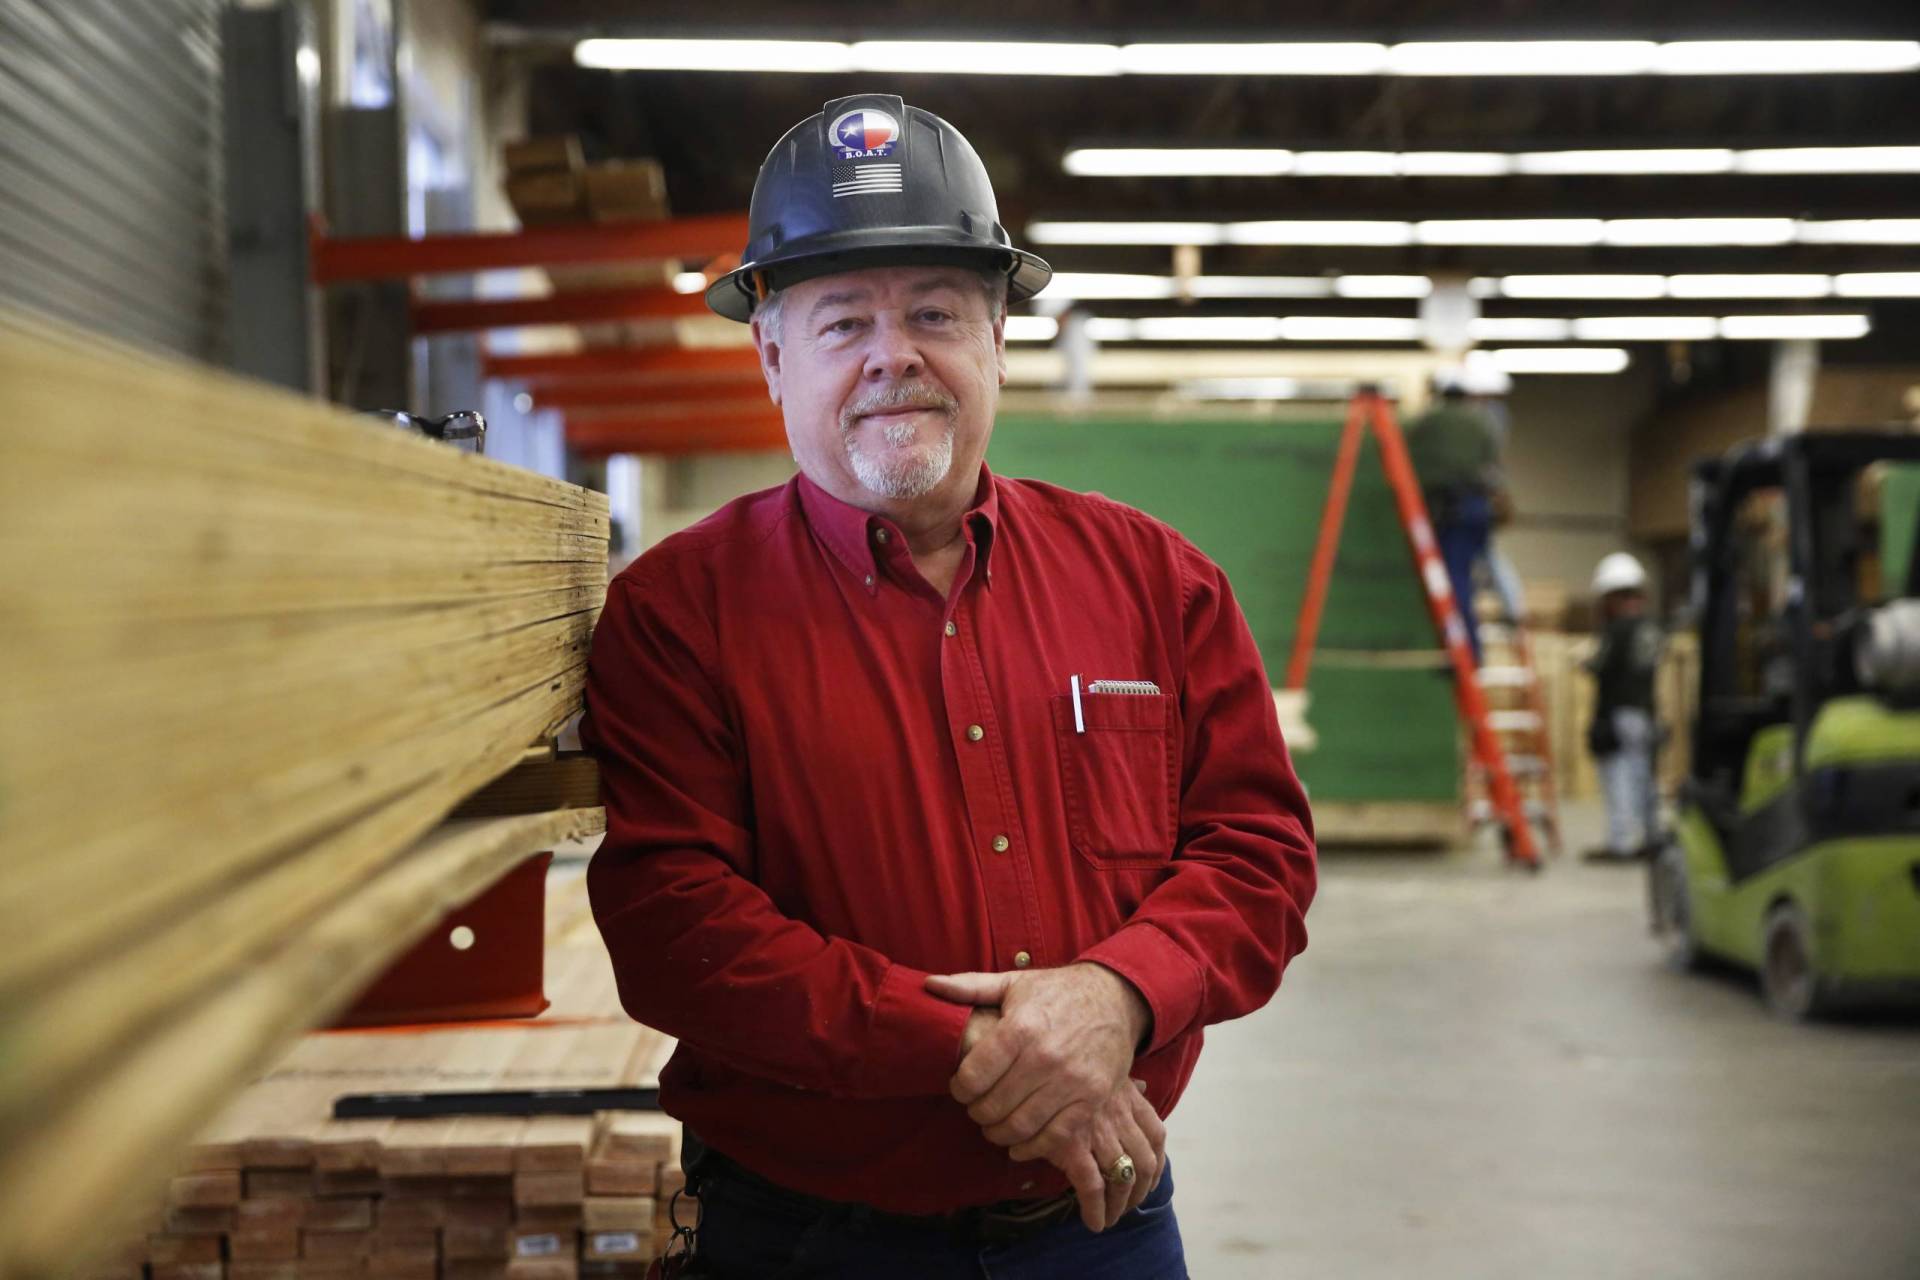 Tony Chaffin leads the construction program at Texas State Technical College.